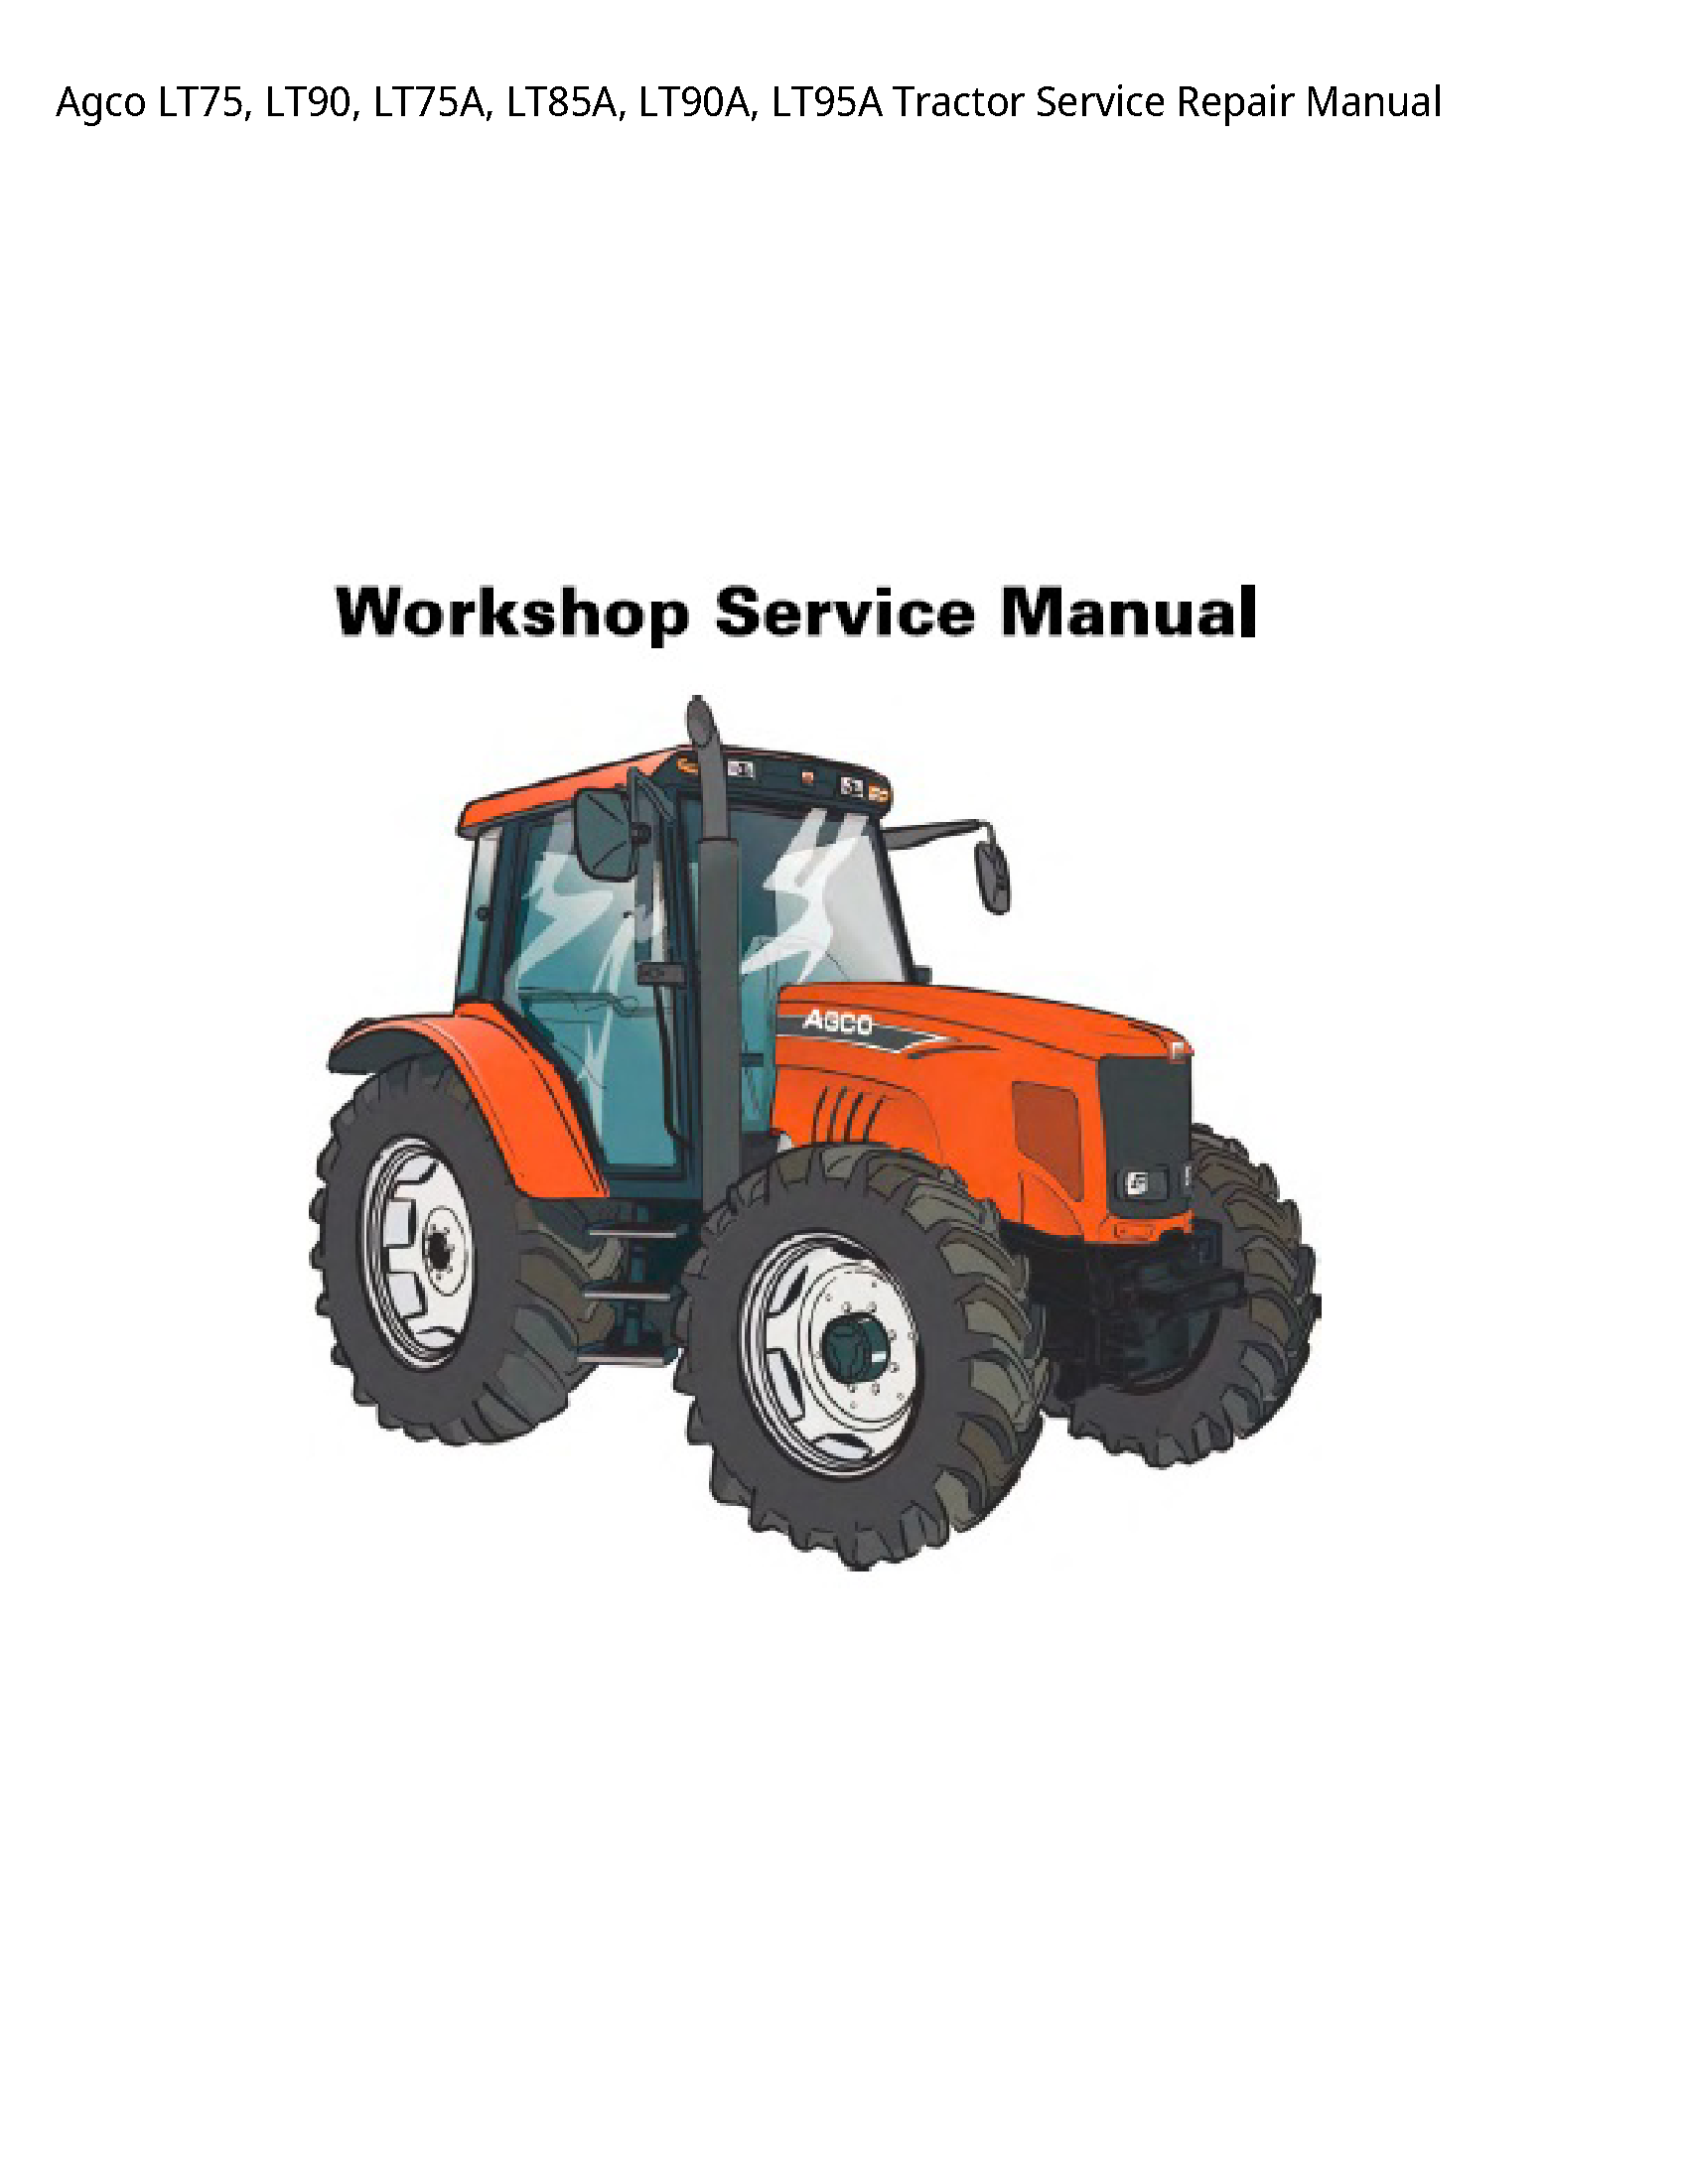 AGCO LT75 Tractor manual